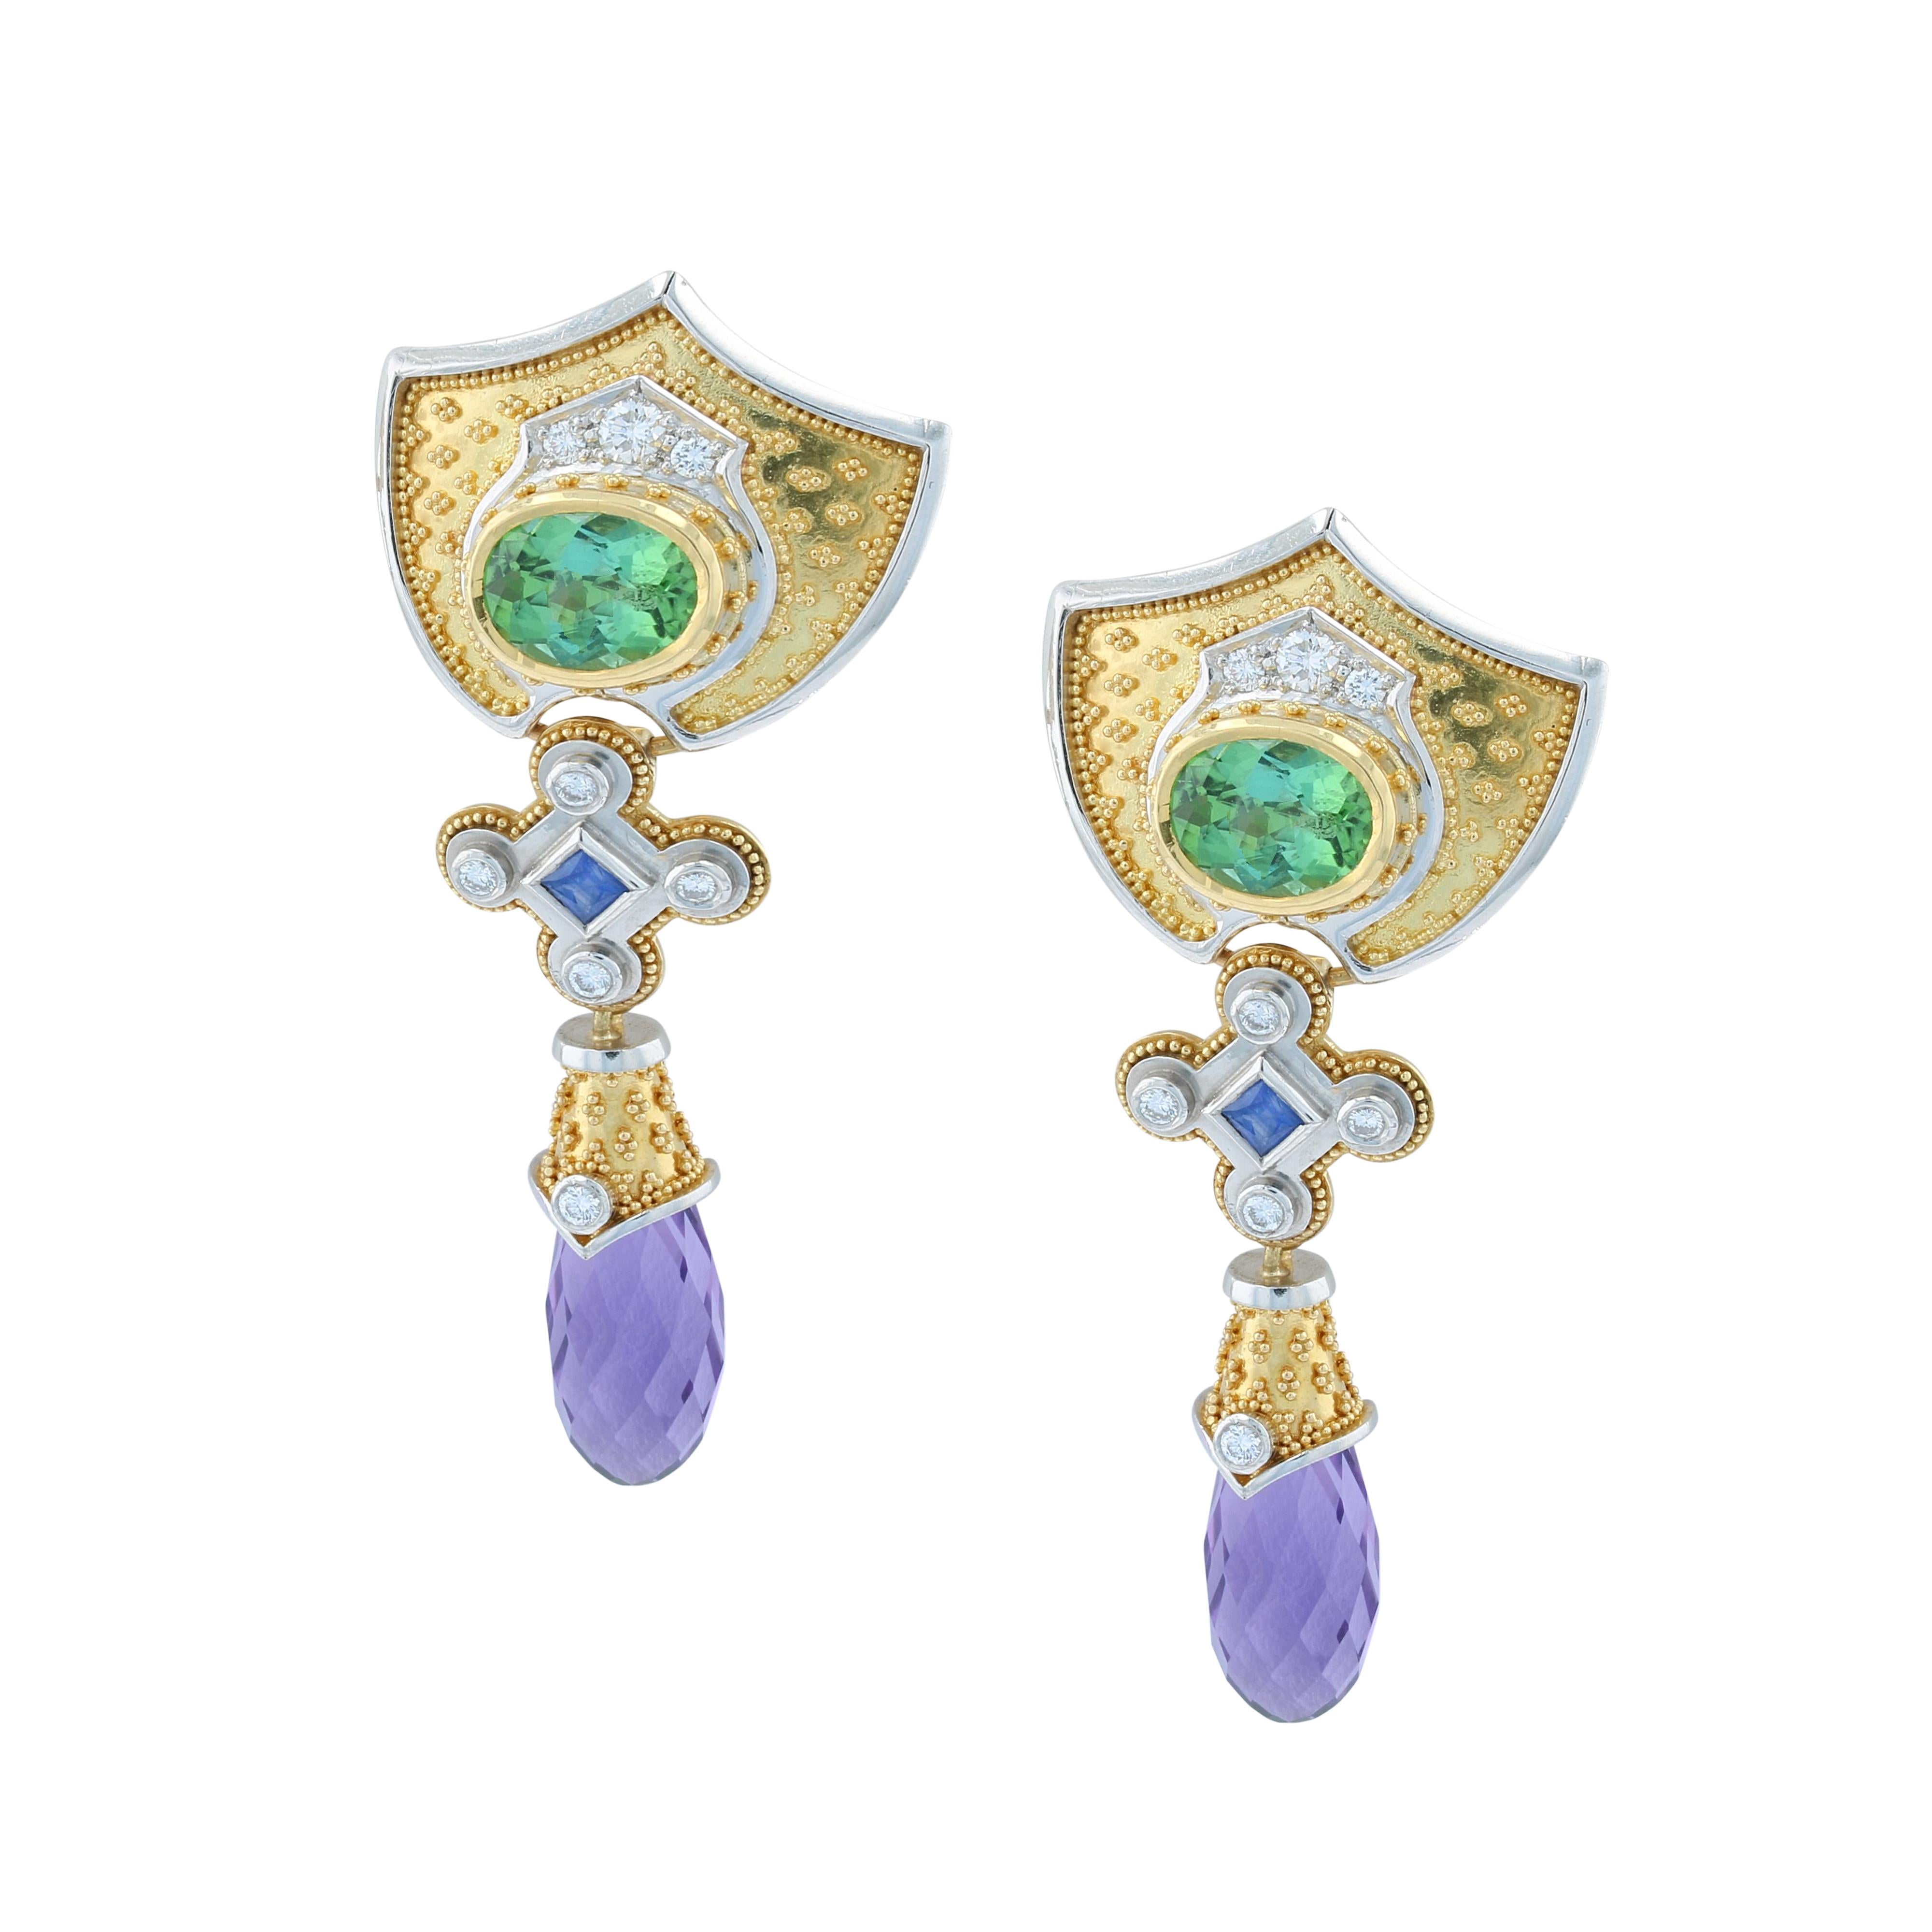 From the Kent Raible one of a kind Masterworks Collection, we present Raible's colorful Chandelier Earrings. Hand fabricated with bright Green Tourmalines, Bolivian Amethyst Briolets, Blue Sapphires and the sparkle of Diamonds, these earrings dance